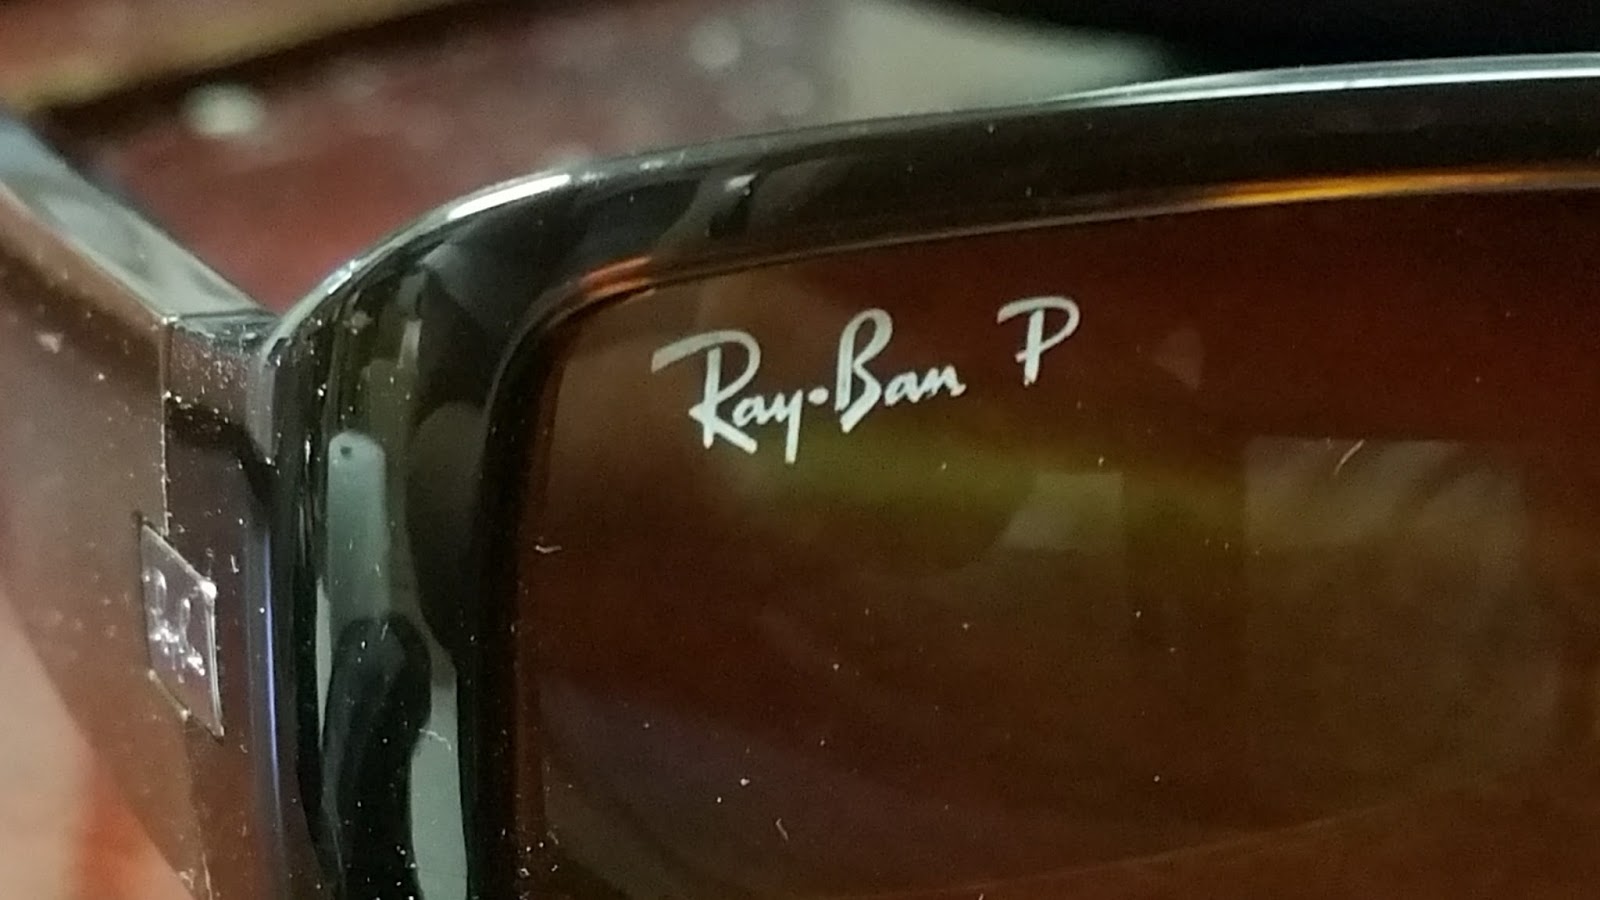 ray ban p meaning